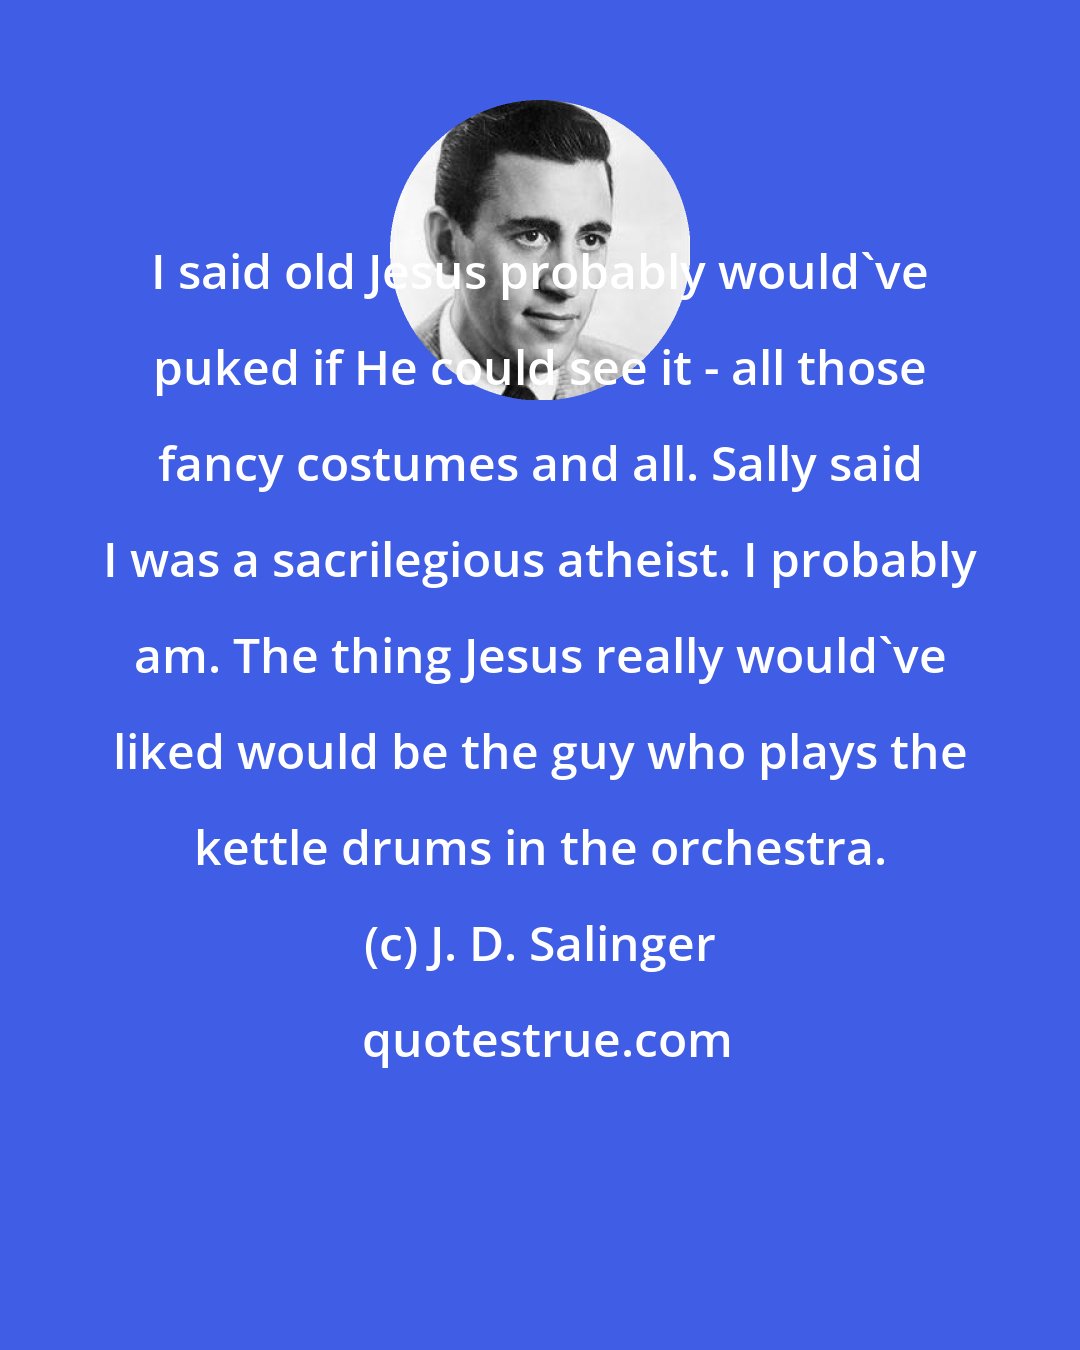 J. D. Salinger: I said old Jesus probably would've puked if He could see it - all those fancy costumes and all. Sally said I was a sacrilegious atheist. I probably am. The thing Jesus really would've liked would be the guy who plays the kettle drums in the orchestra.